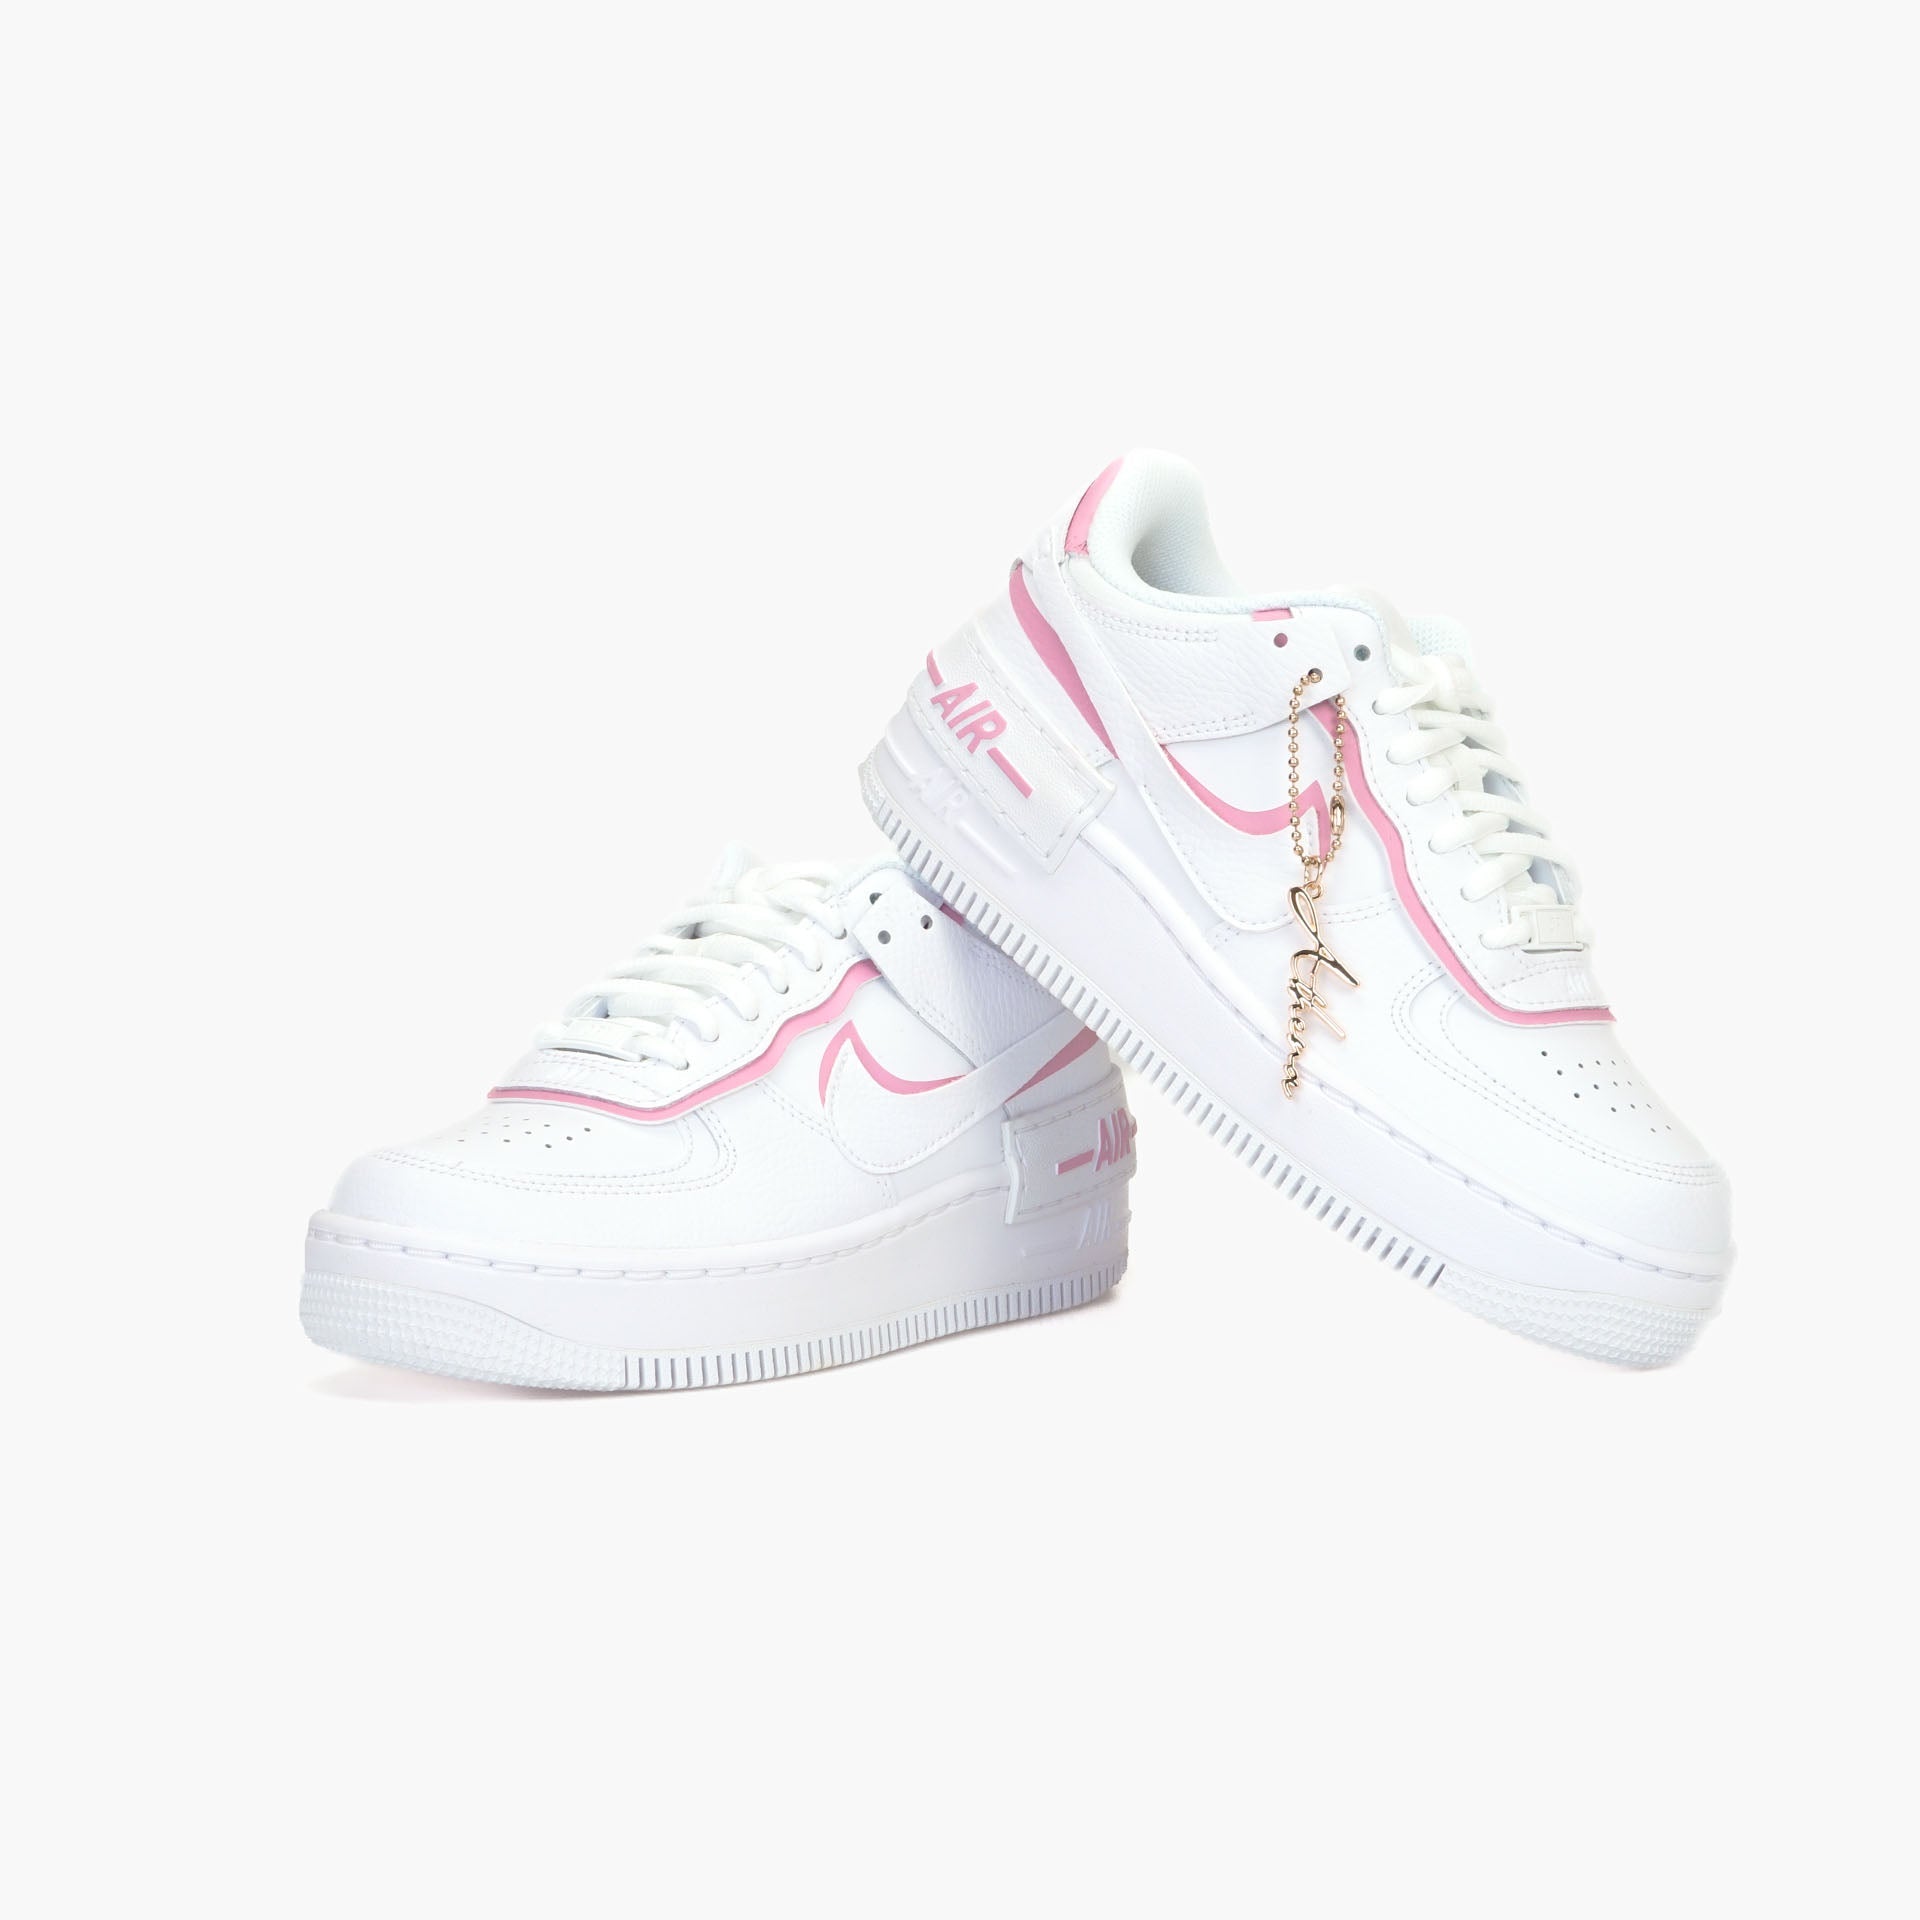 Frons Voorspellen Adelaide Custom Nike Air Force 1 Shadow 07 Painted Shoes Sneaker For Women And Men  Pink – ATHENA